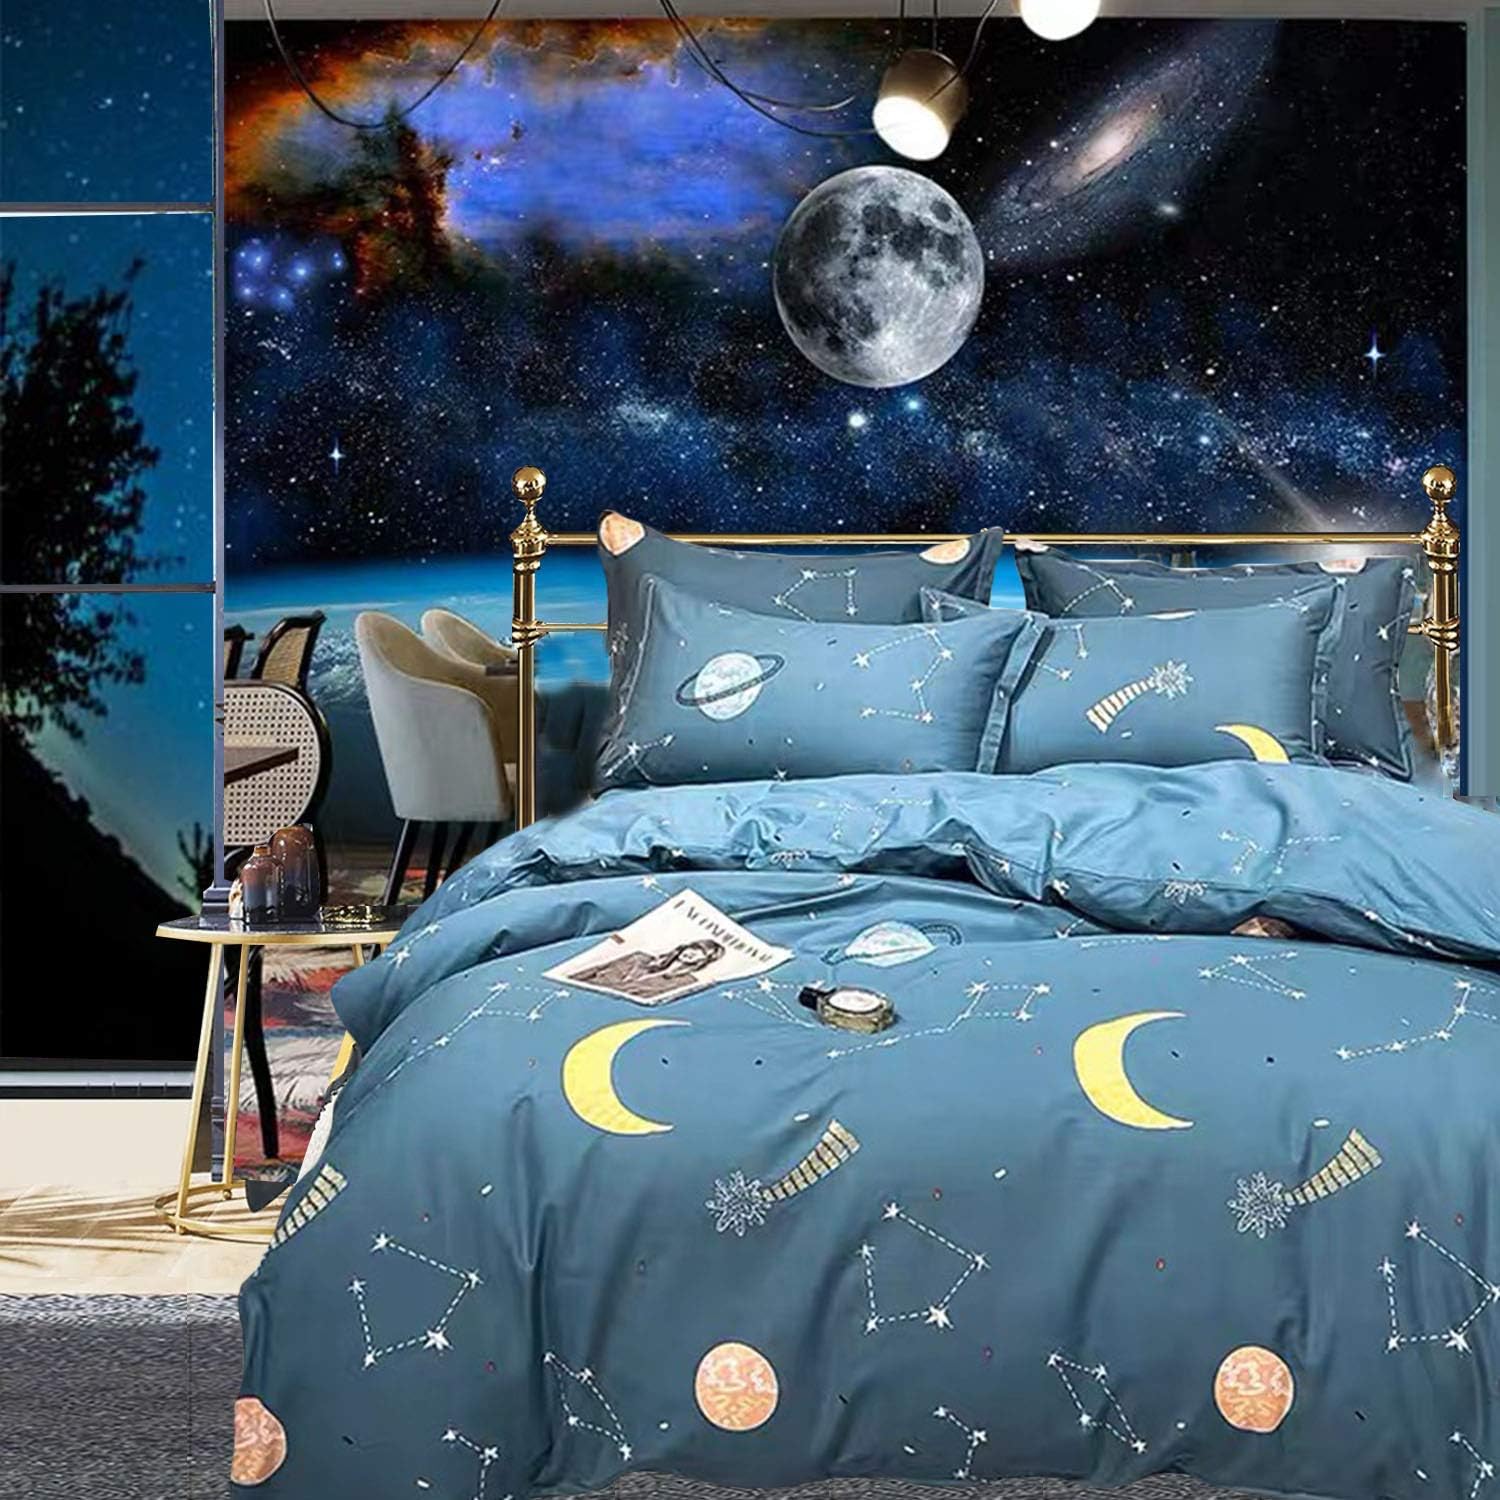 FADFAY Galaxy Bedding Twin 100% Cotton Boys Universe Space Constellation Duvet Cover Meteor Moon Star Printed Bed Set Soft Reversible Zipper Bedding 3 Pcs Navy BlueNo Filling